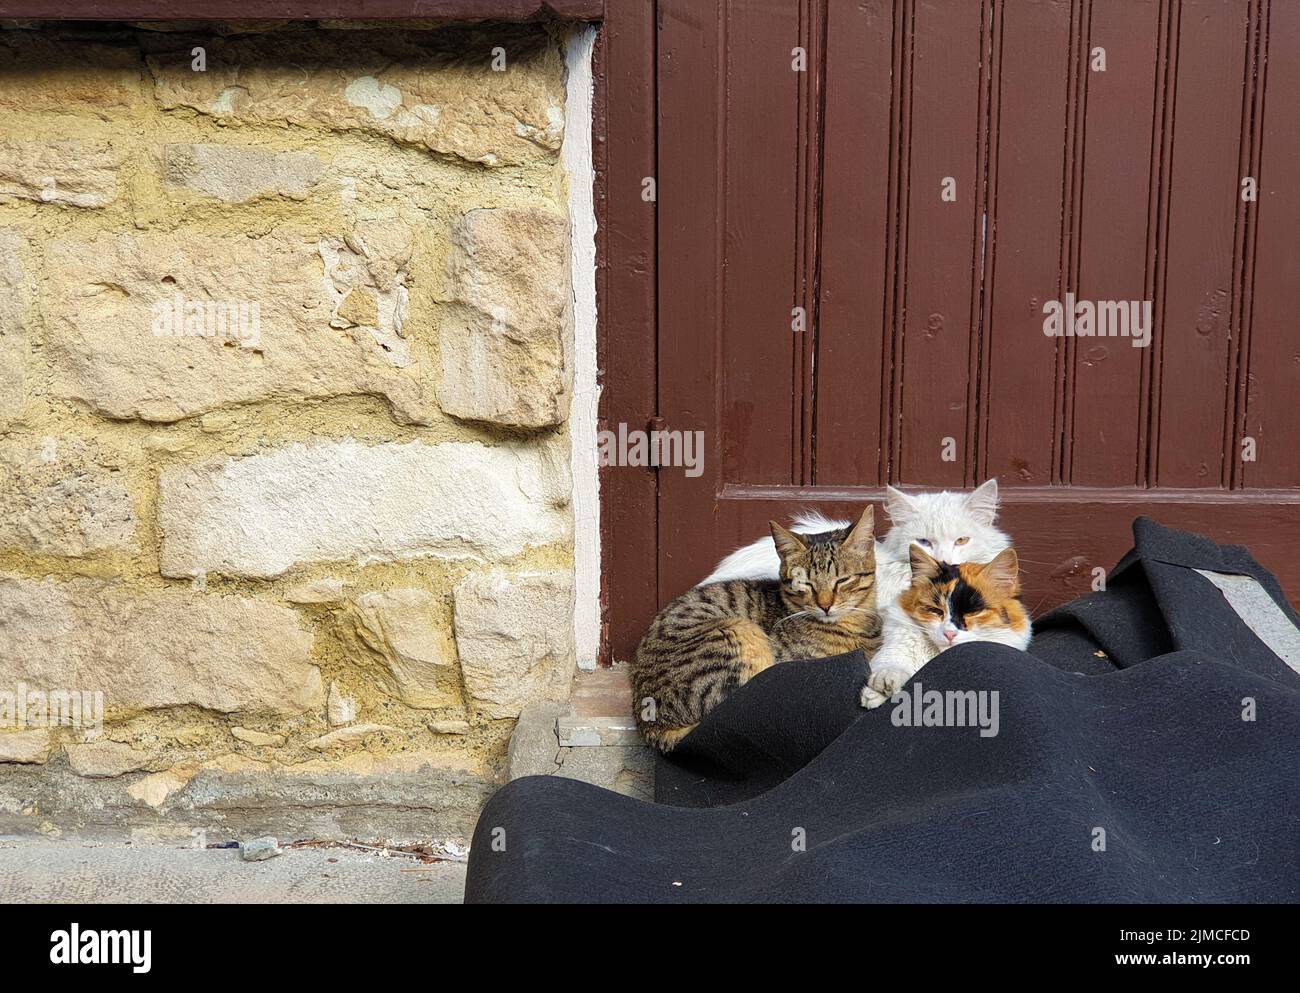 Three cute cats sit at the entrance door of a traditional house Stock Photo